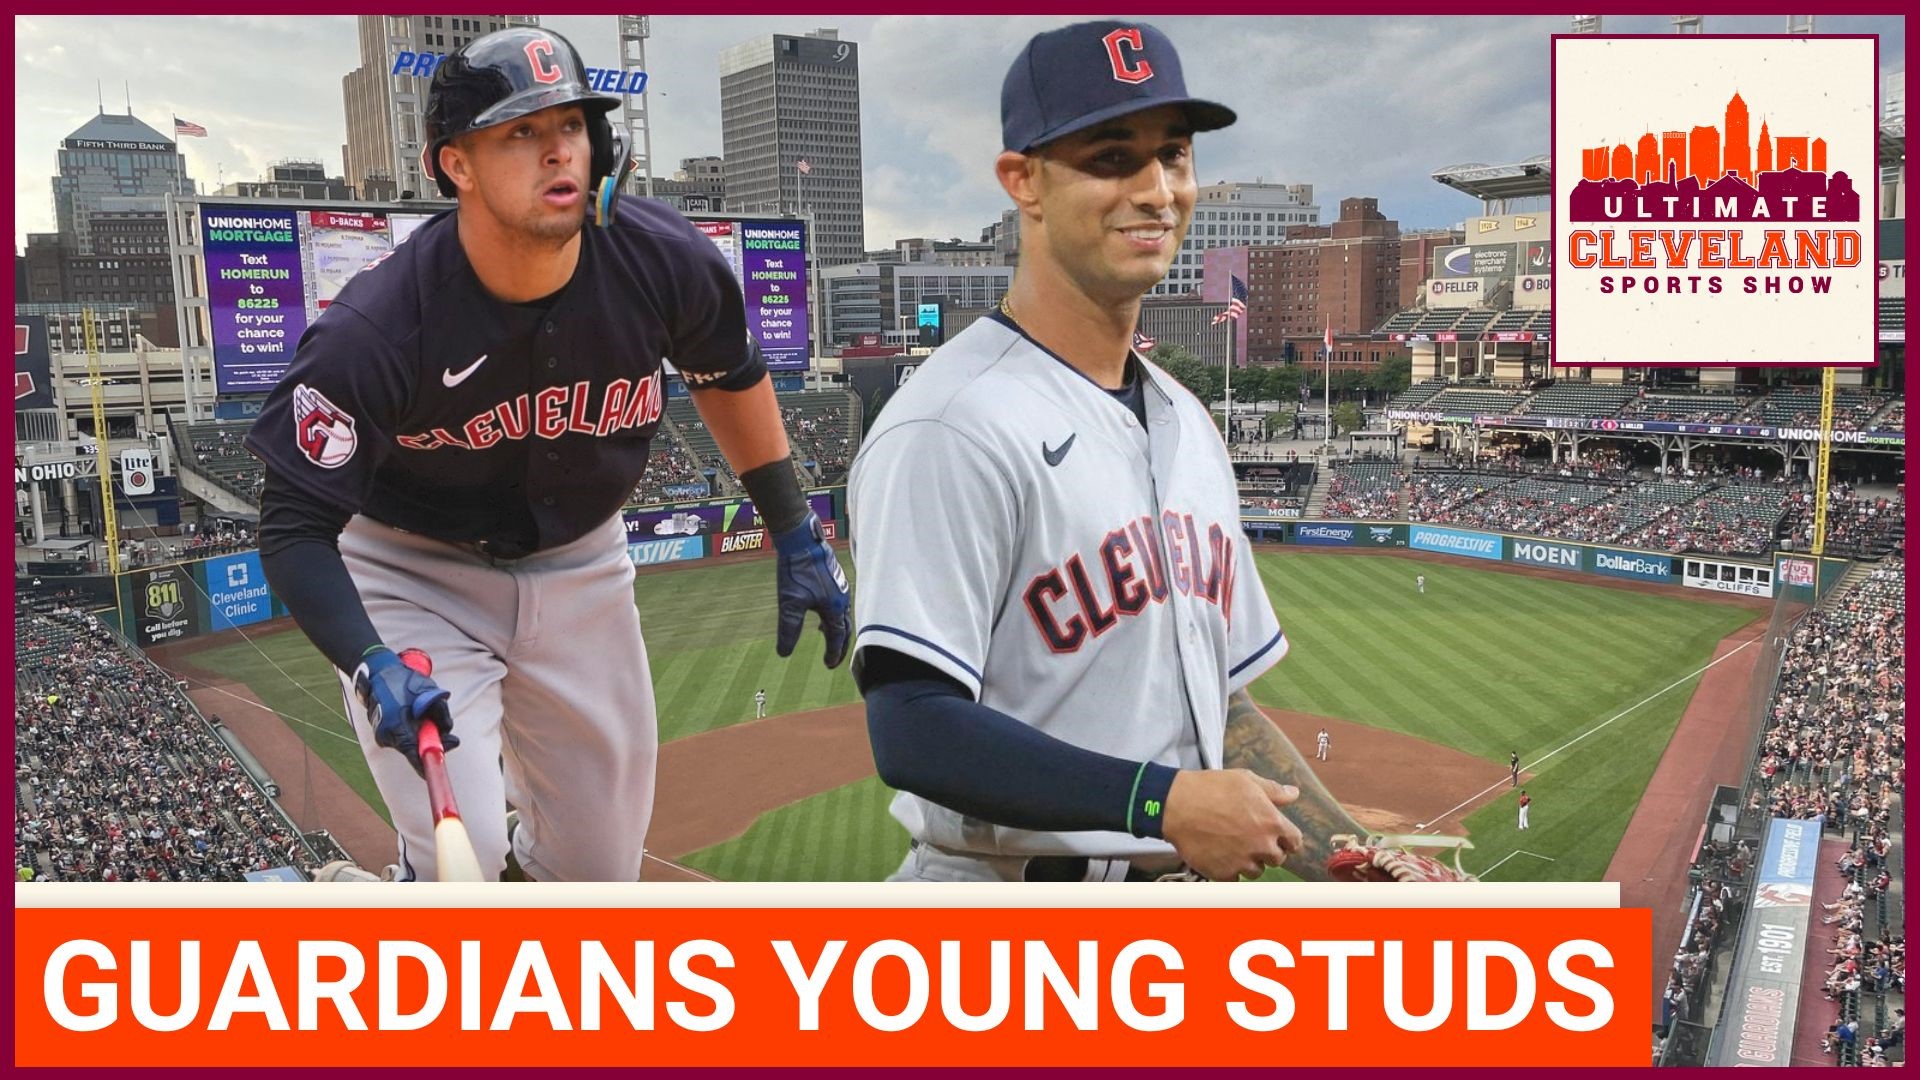 The Cleveland Guardians are on a super hot streak to start the season in a surprising fashion. But which of the young Cleveland Guardians has impressed us all the...